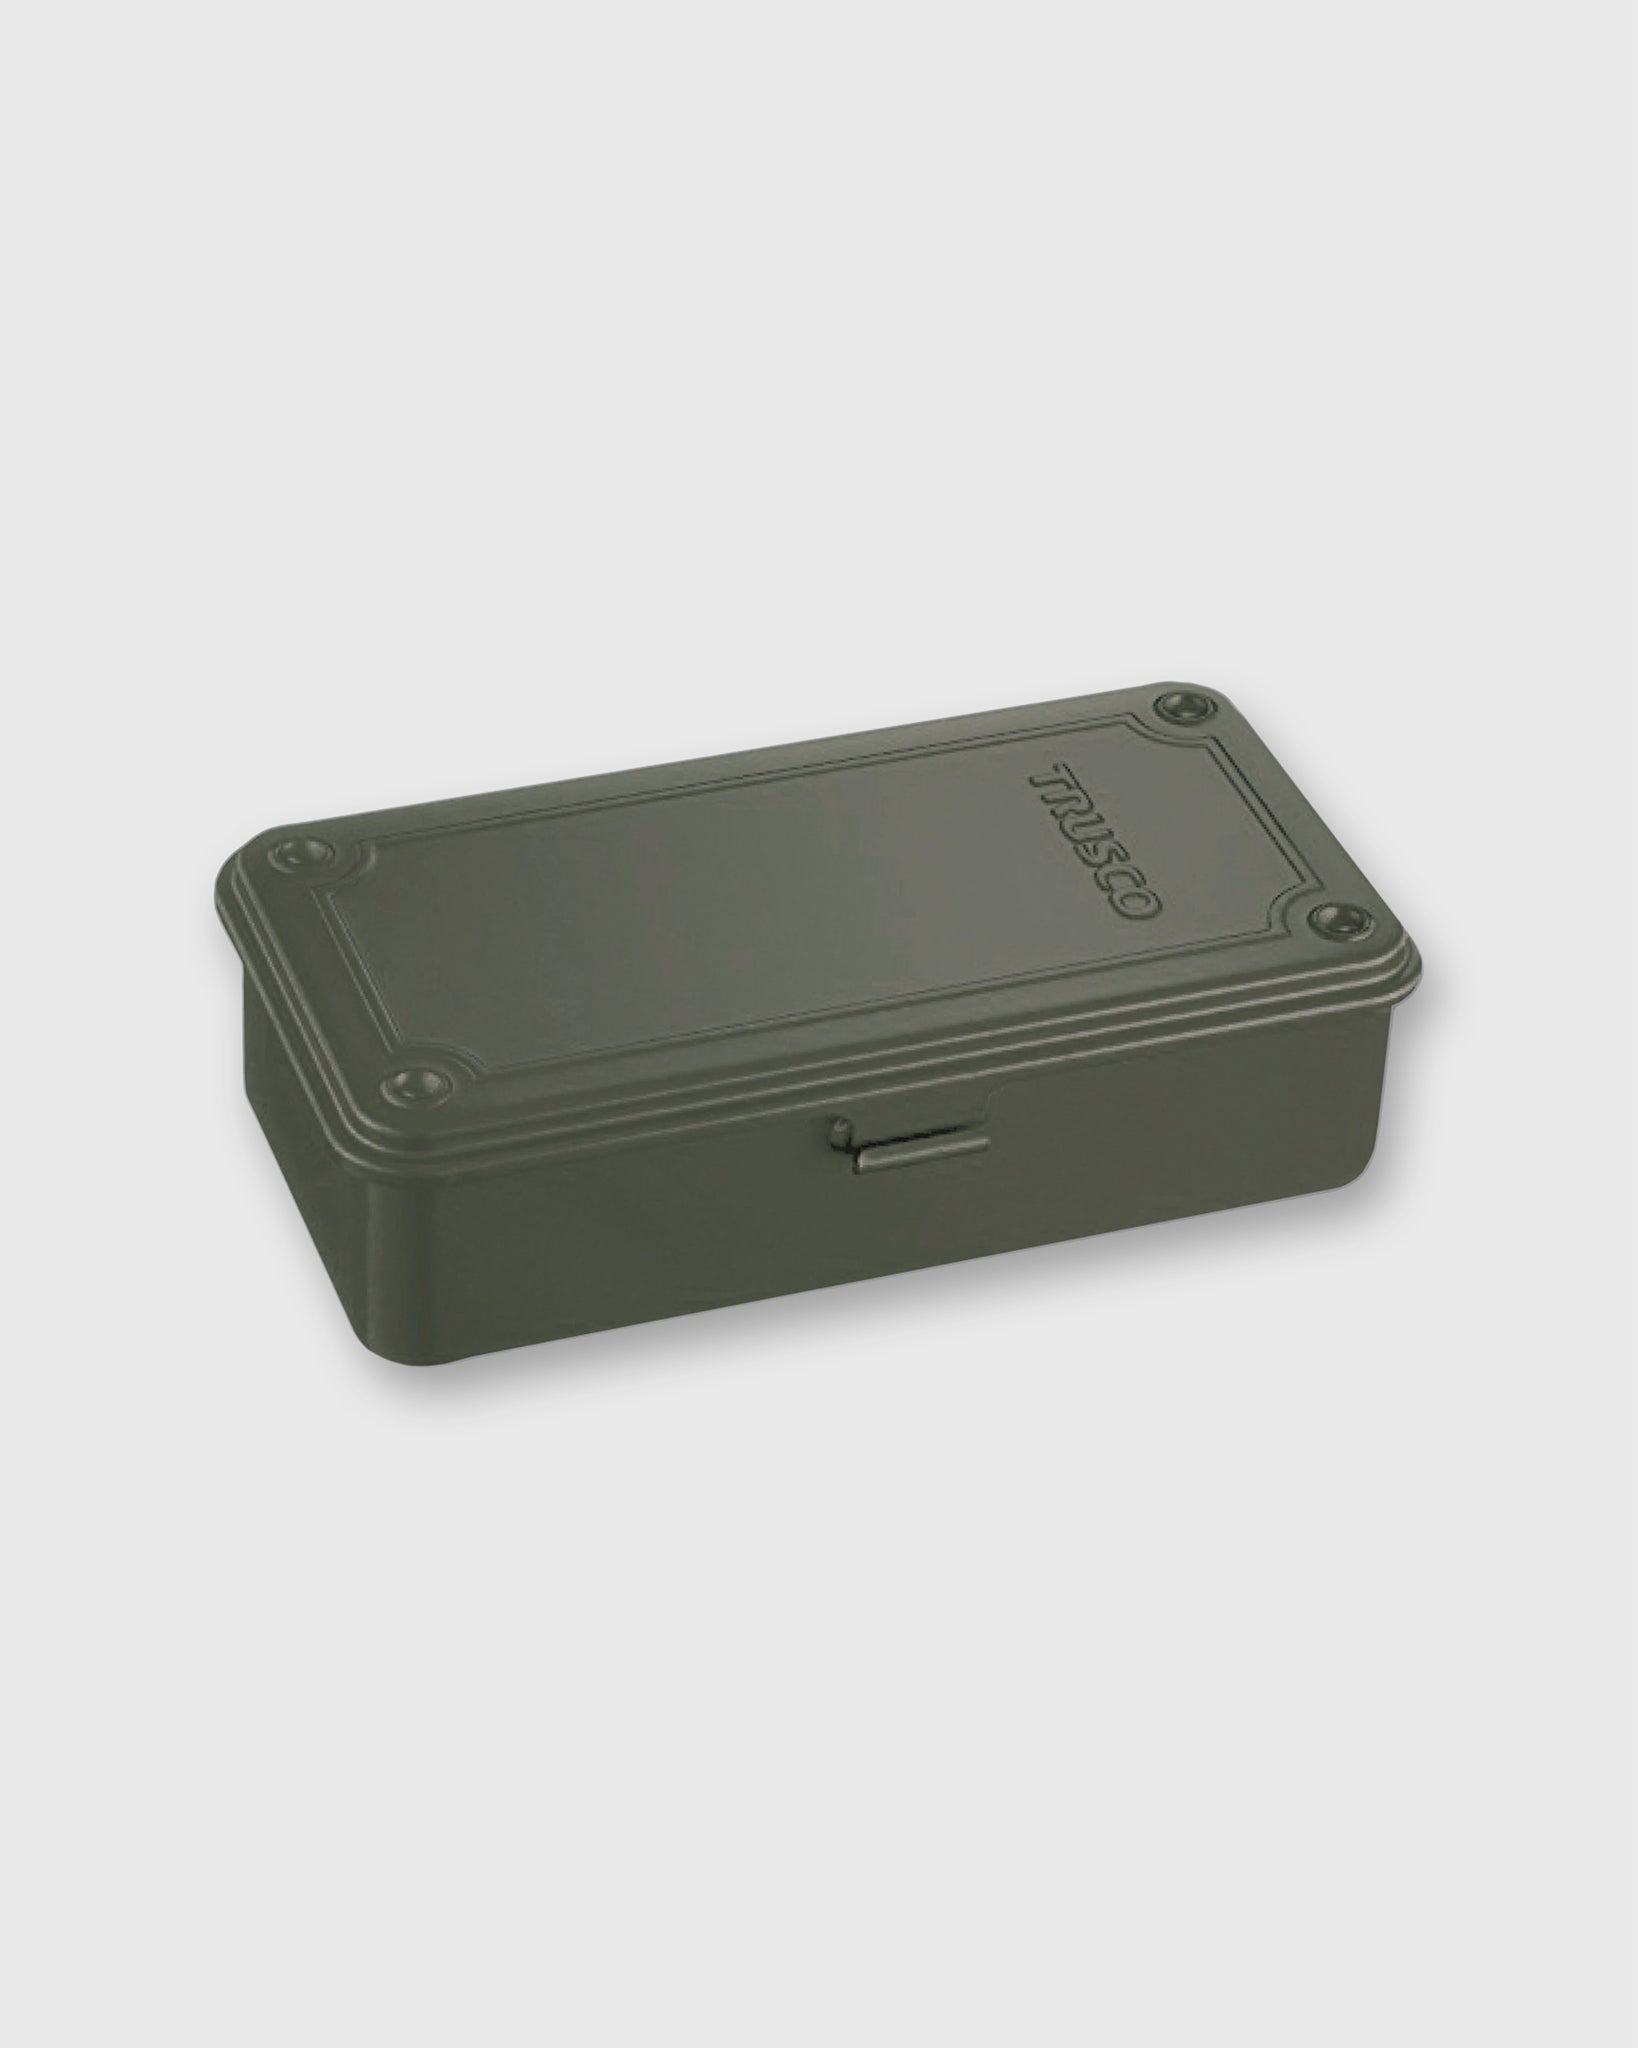 Parts Box T-190 in Olive Drab